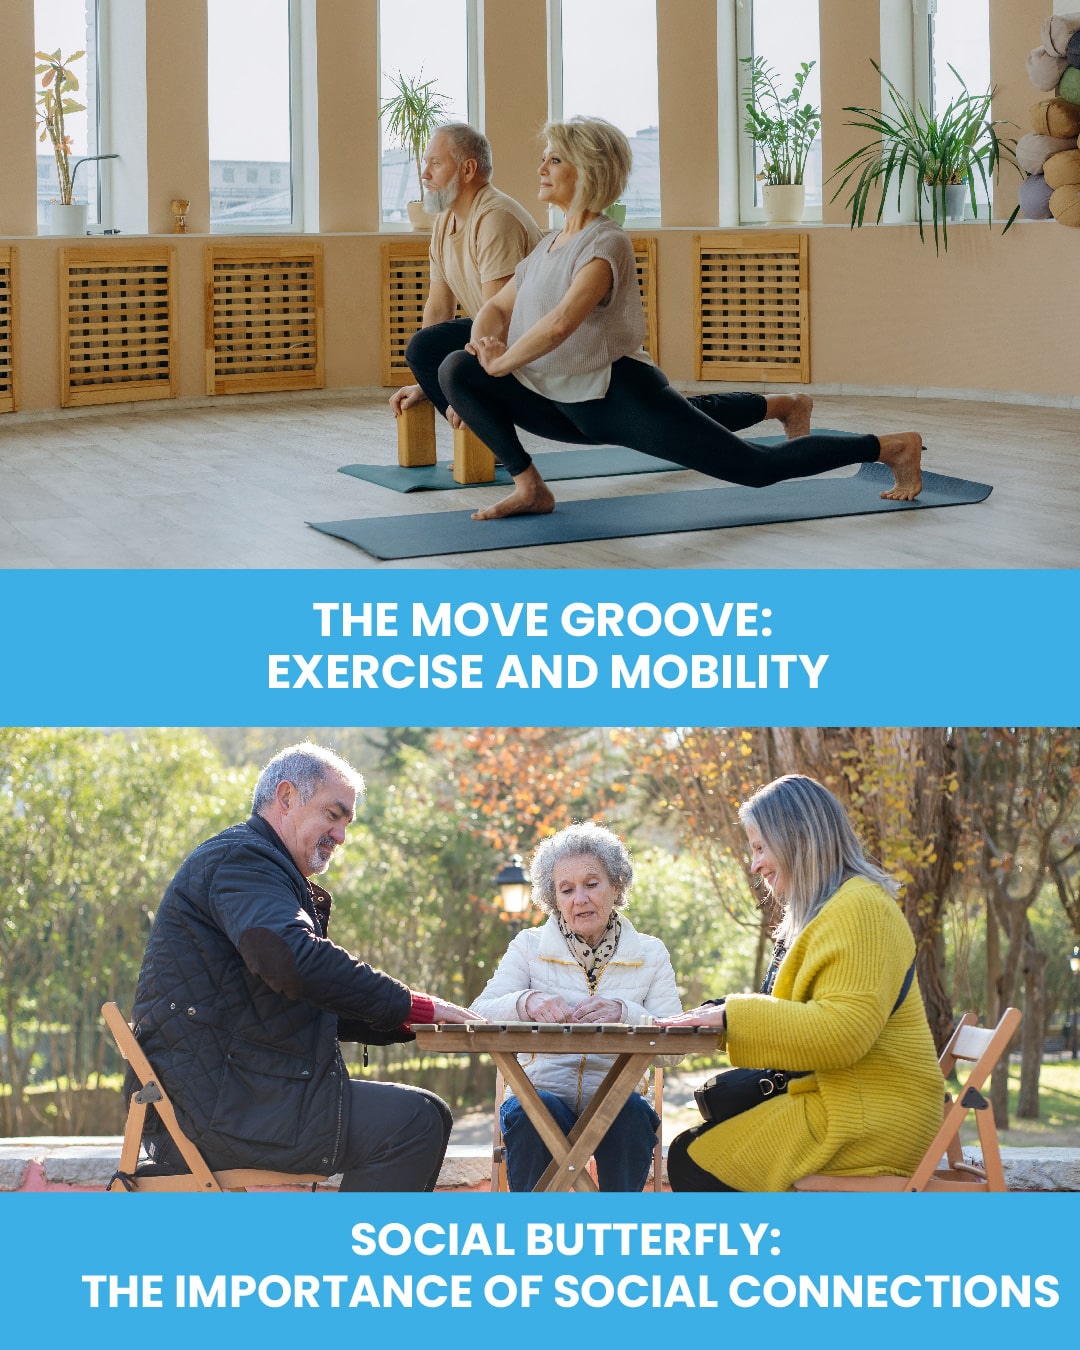 Top: Elderly couple stretching with 'The Move Groove: Exercise and Mobility' title. Bottom: Three elderly people playing table game at park with 'Social Butterfly: The Importance of Social Connections' title